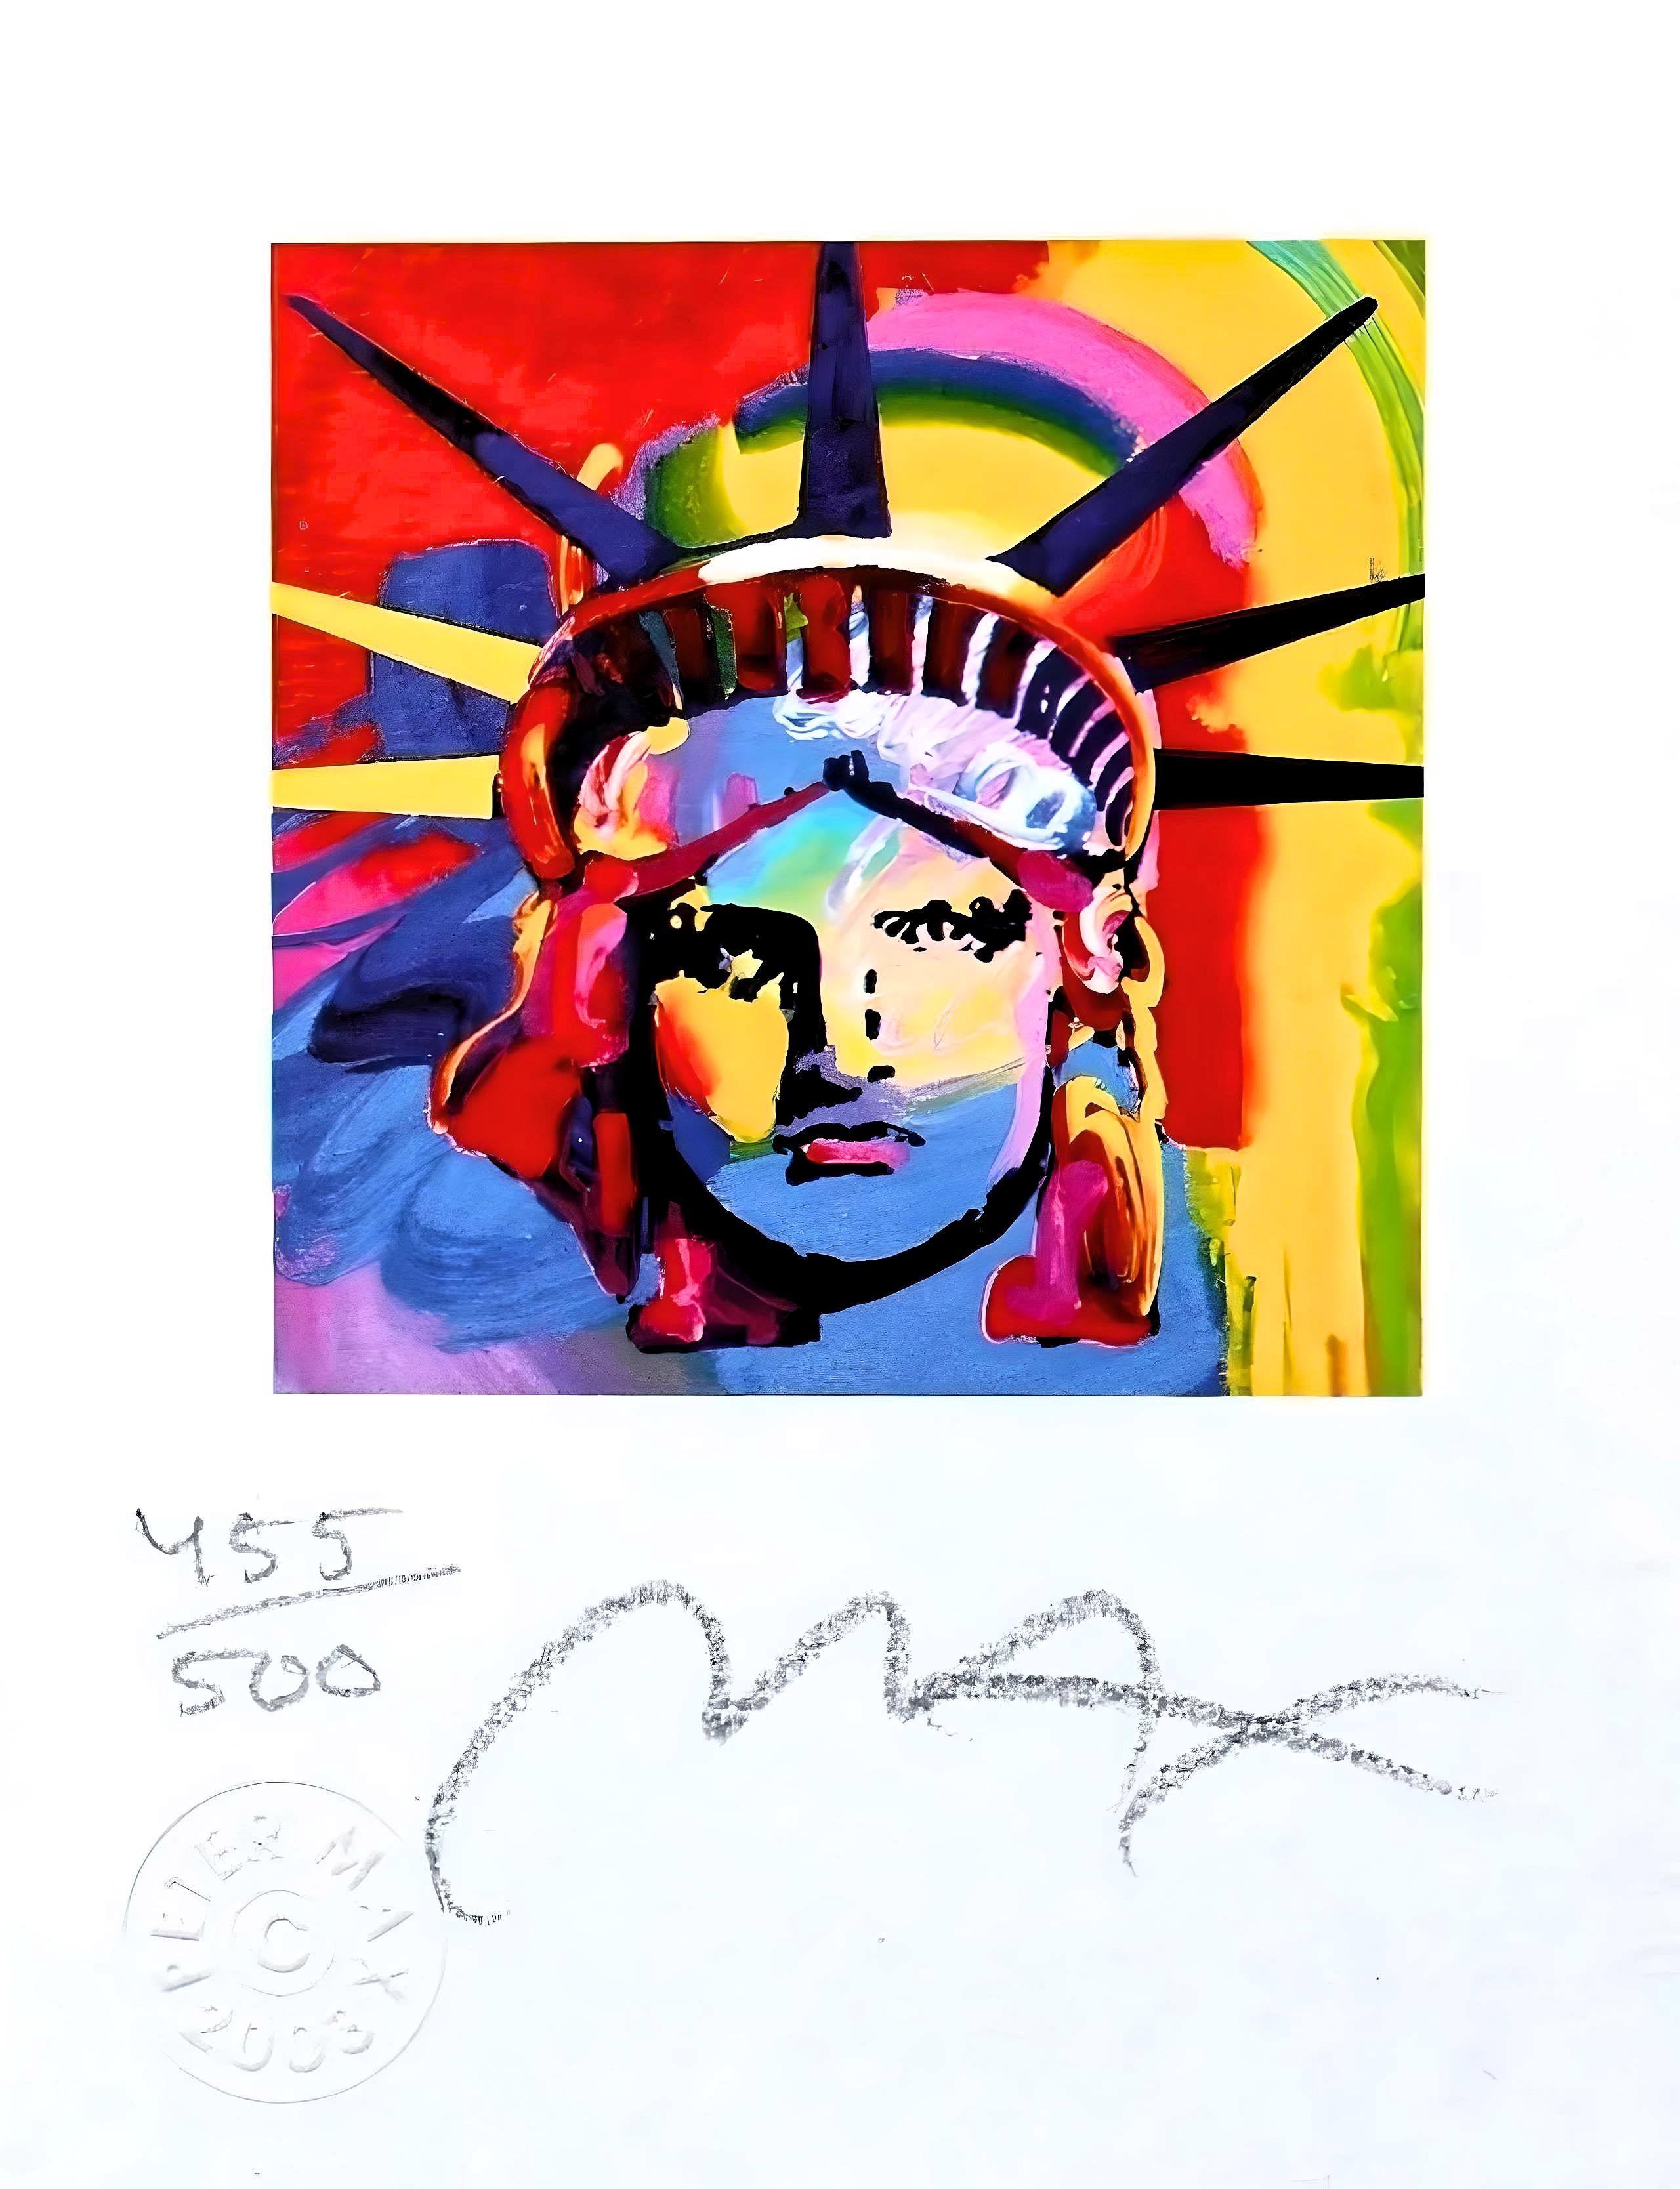 Artist: Peter Max (1937)
Title: Liberty Head VIII
Year: 2003
Edition: 455/500, plus proofs
Medium: Lithograph on Lustro Saxony paper
Size: 3.43 x 2.62 inches
Condition: Excellent
Inscription: Signed and numbered by the artist.
Notes: Published by